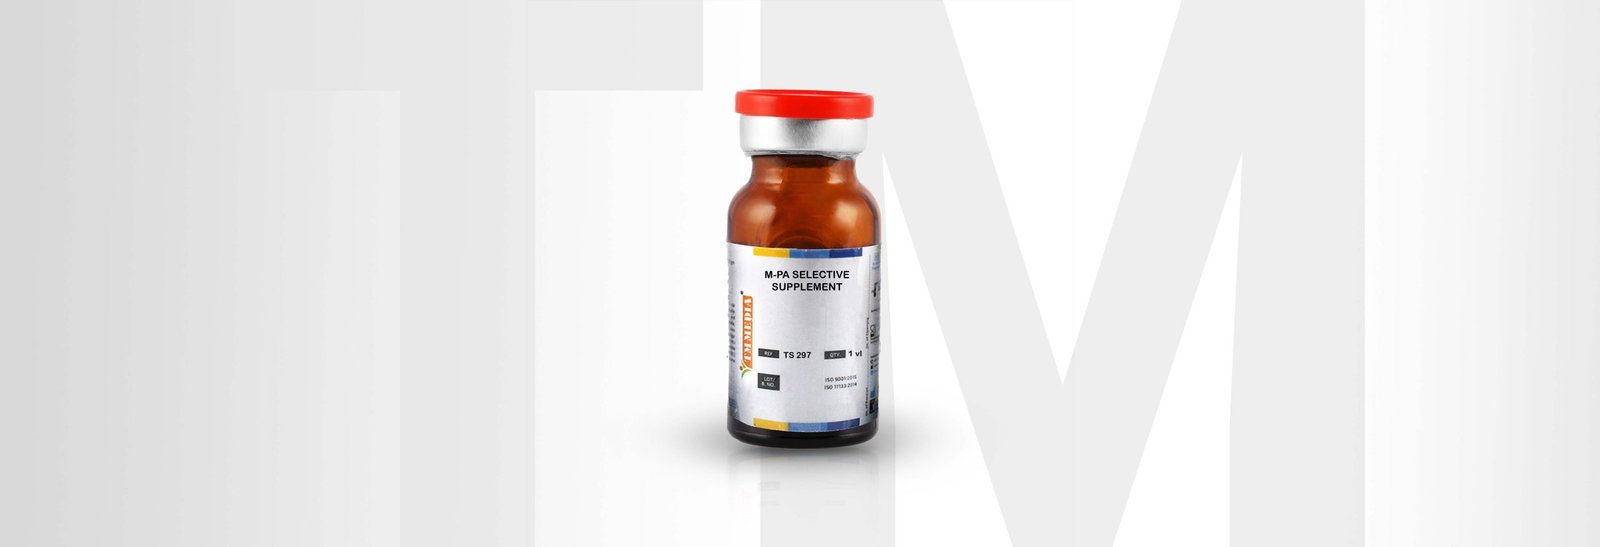 M-PA SELECTIVE SUPPLEMENT AT TM MEDIA